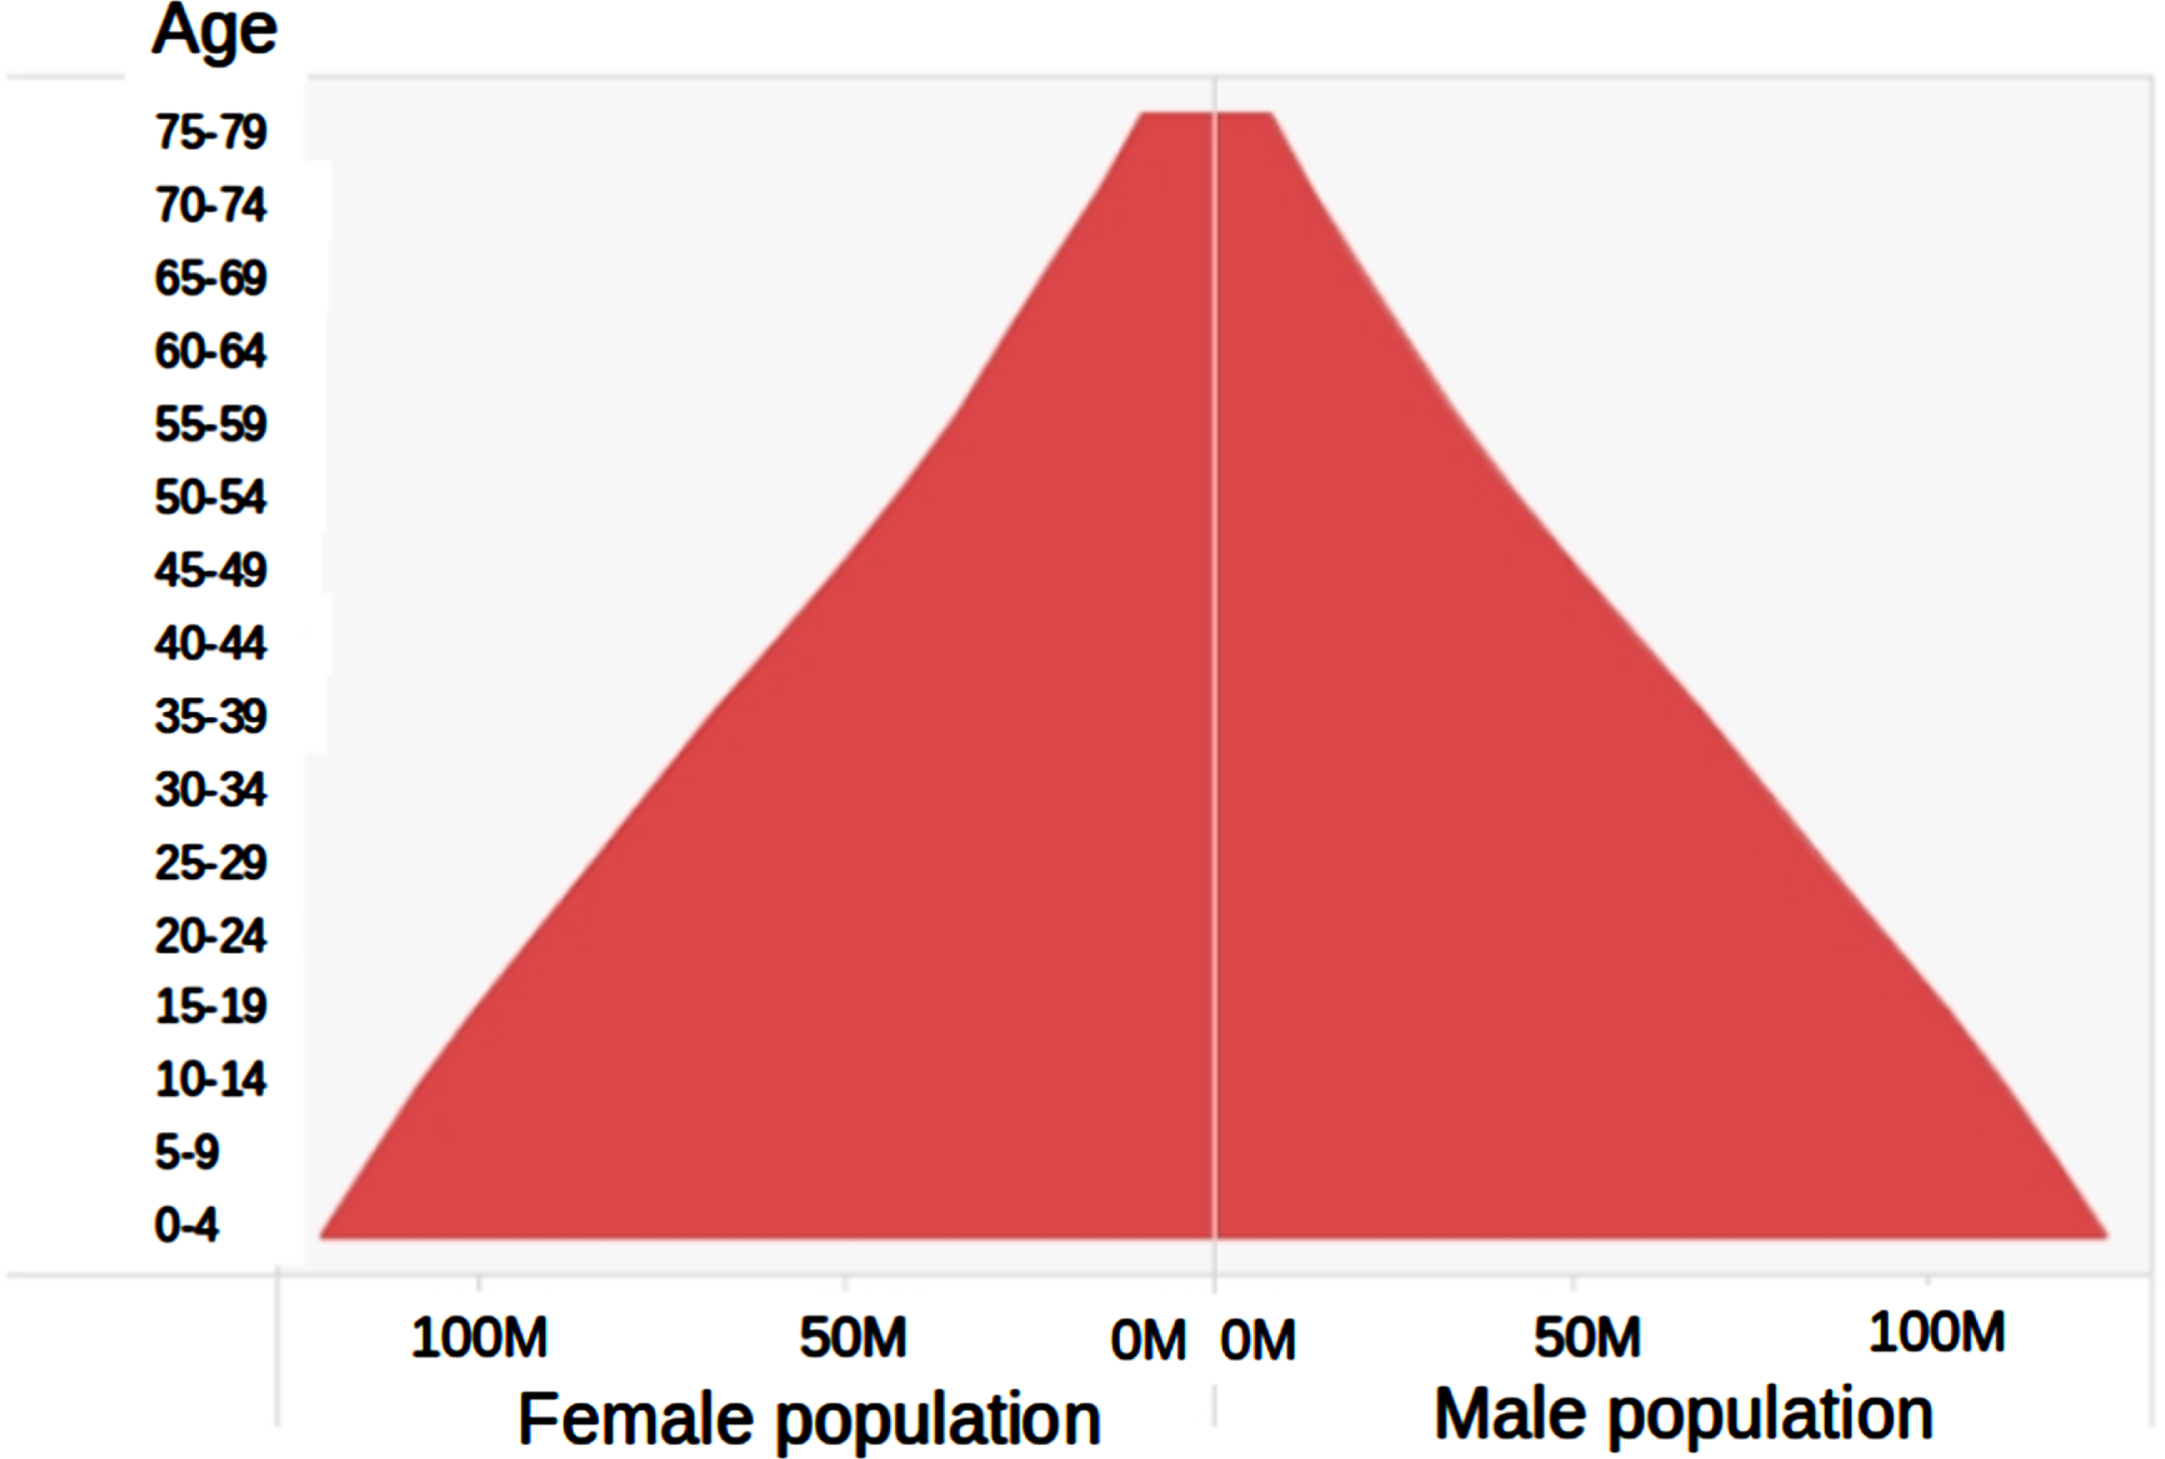 Pyramidal age distribution in millions population per gender projected for SSA 2050. United Nations, Department of Economic and Social Affairs, Population Division (2013). World Population Prospects: The 2012 Revision. (https://www.ageing.ox.ac.uk/population-horizons/data/gpt, Accessed October 17, 2023).